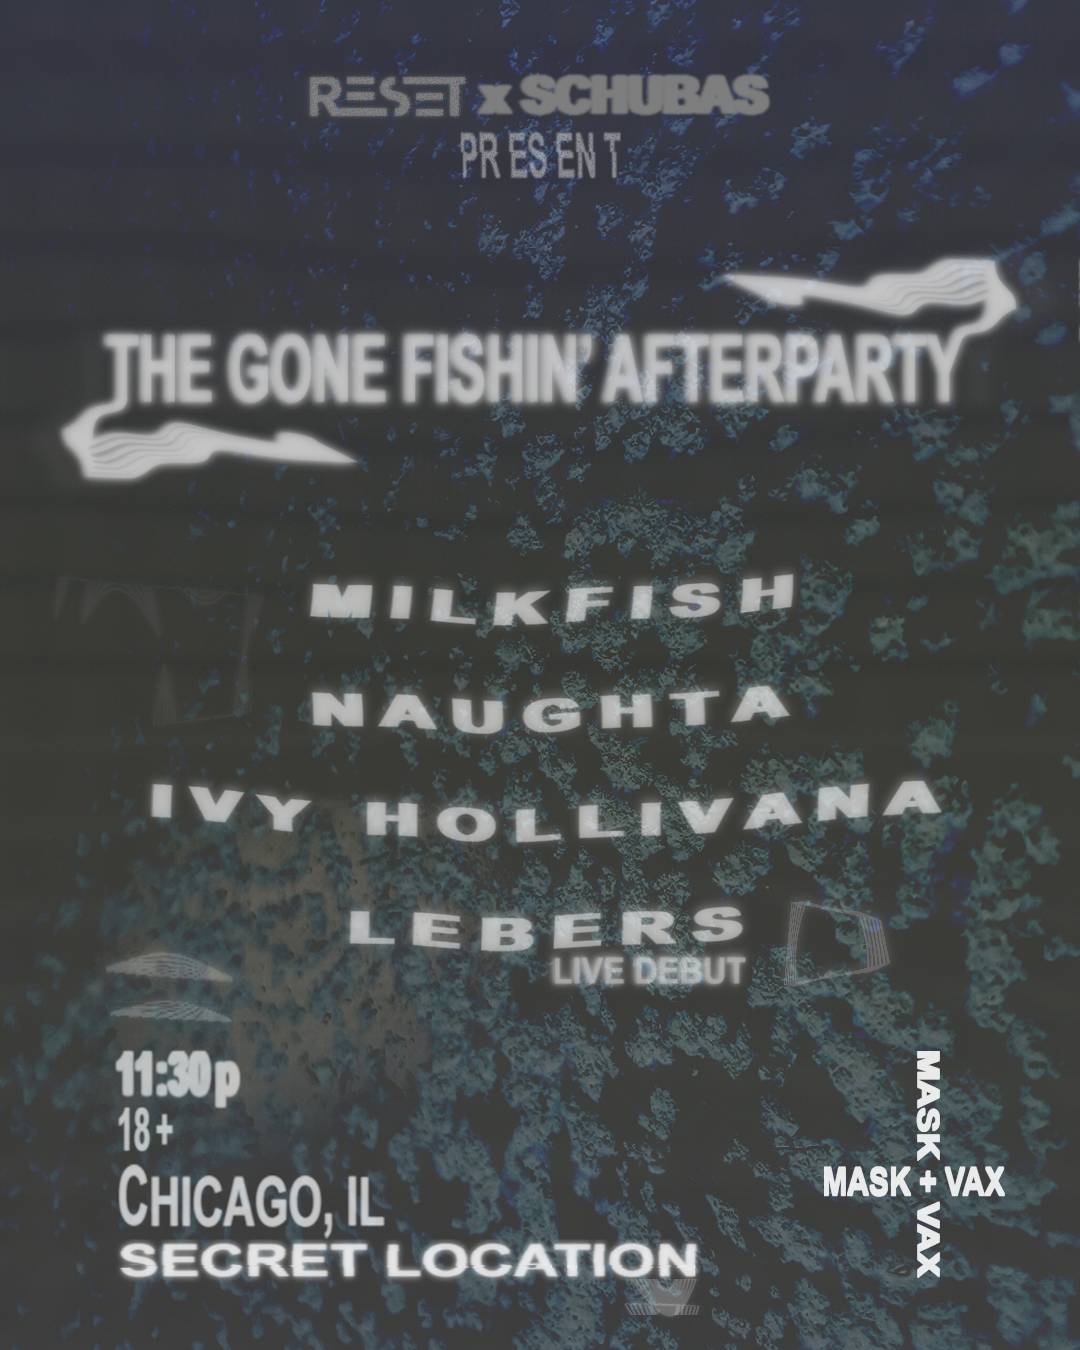 The Gone Fishin' Afterparty flyer